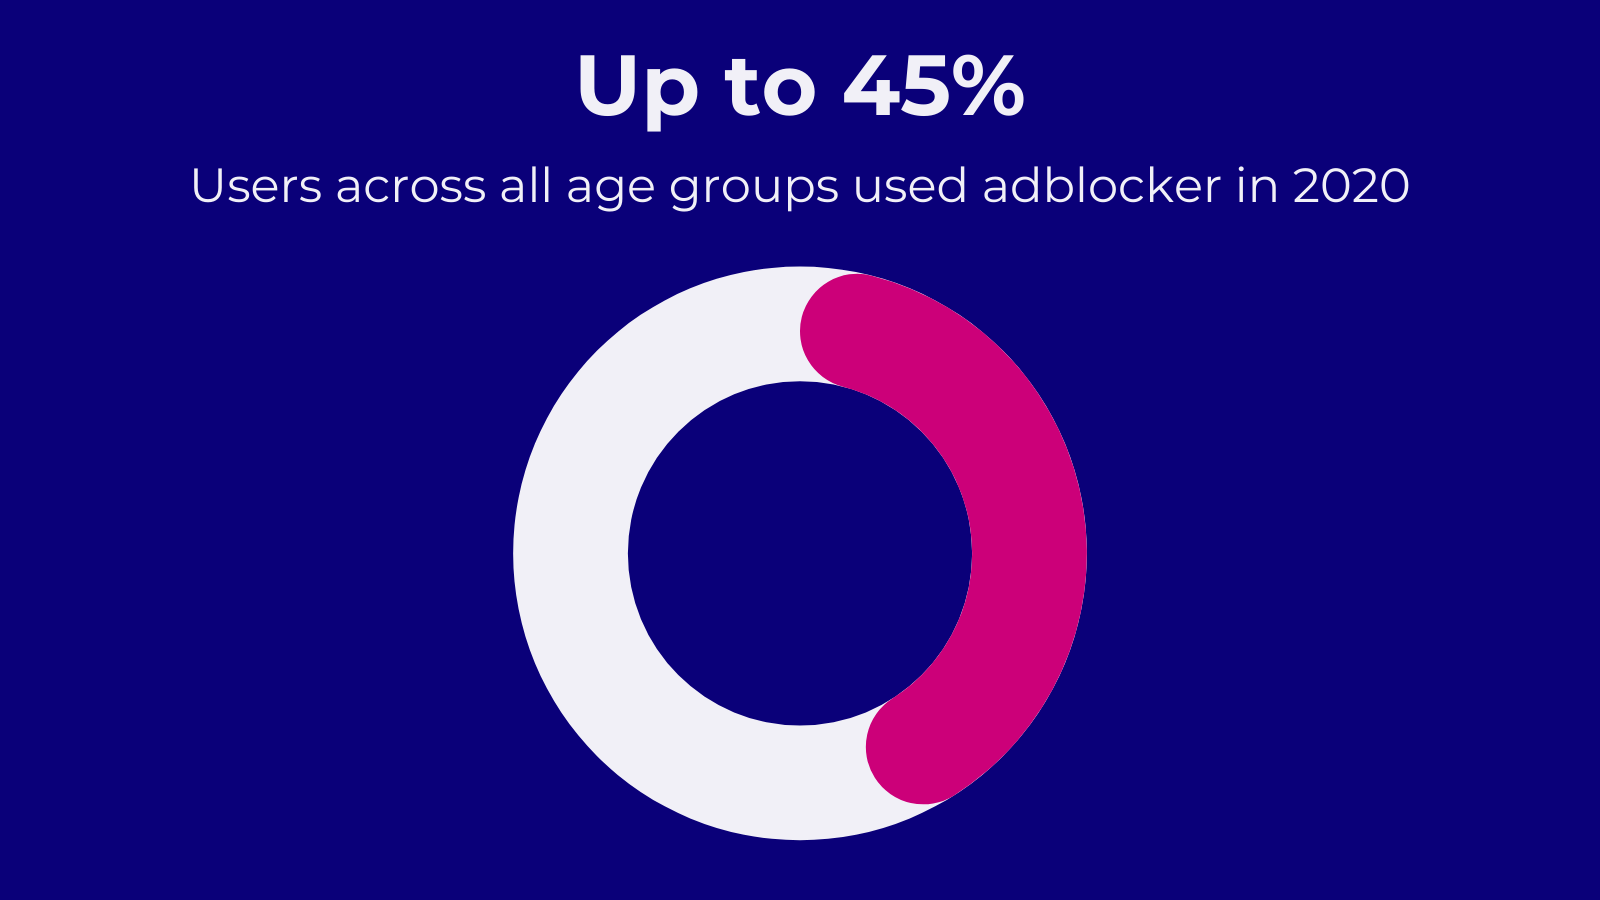 Almost half of users across all age groups use adblockers